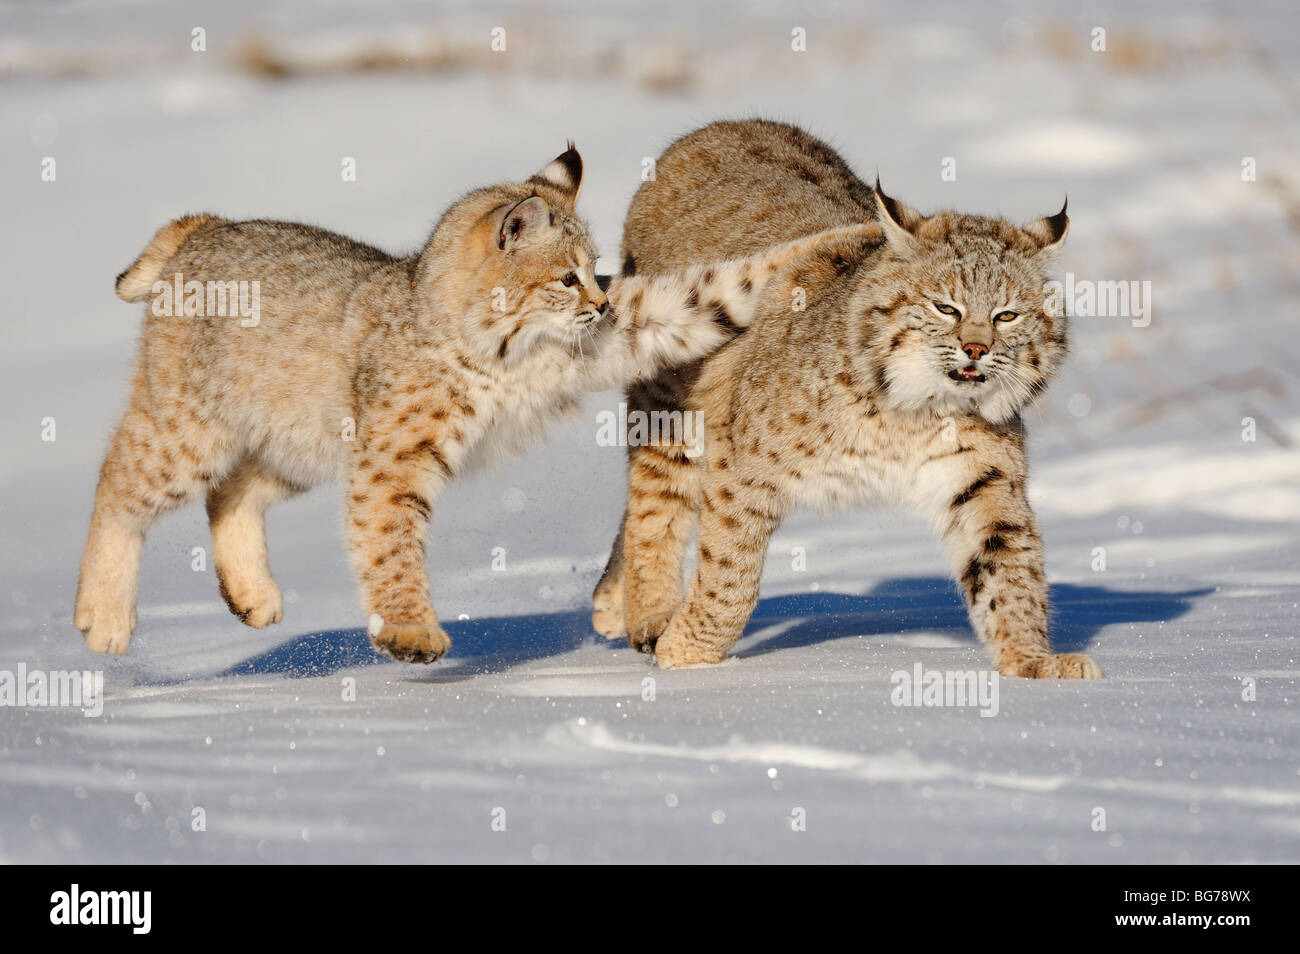 baby bobcat images